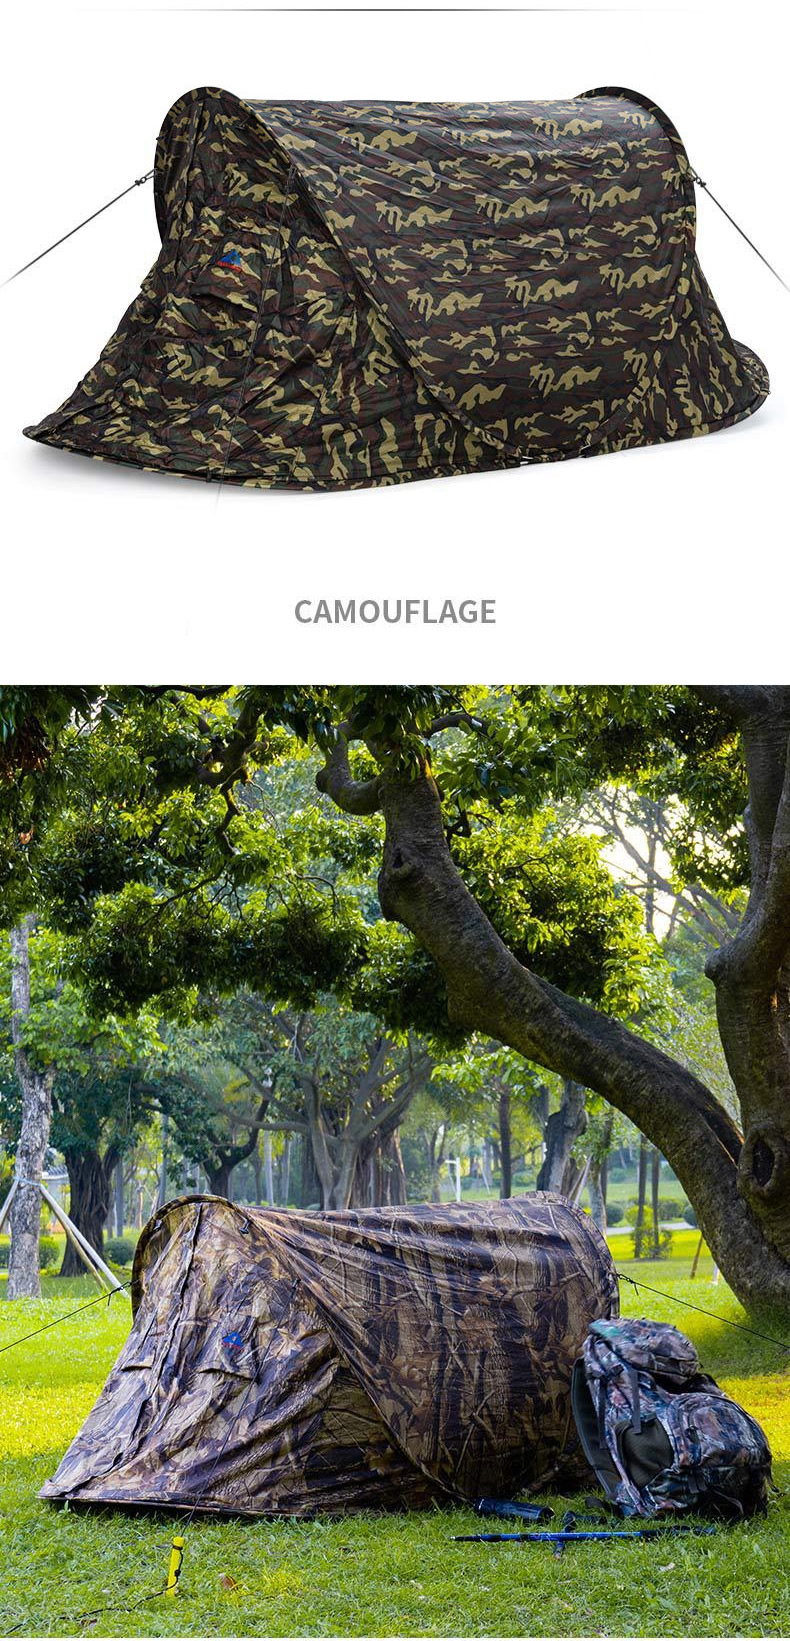 Cheap Goat Tents Outdoor Ultralight Throwing Tent Automatic Pop Up Camouflage Hiking Backpacking Camping Fishing Waterproof Single Tent